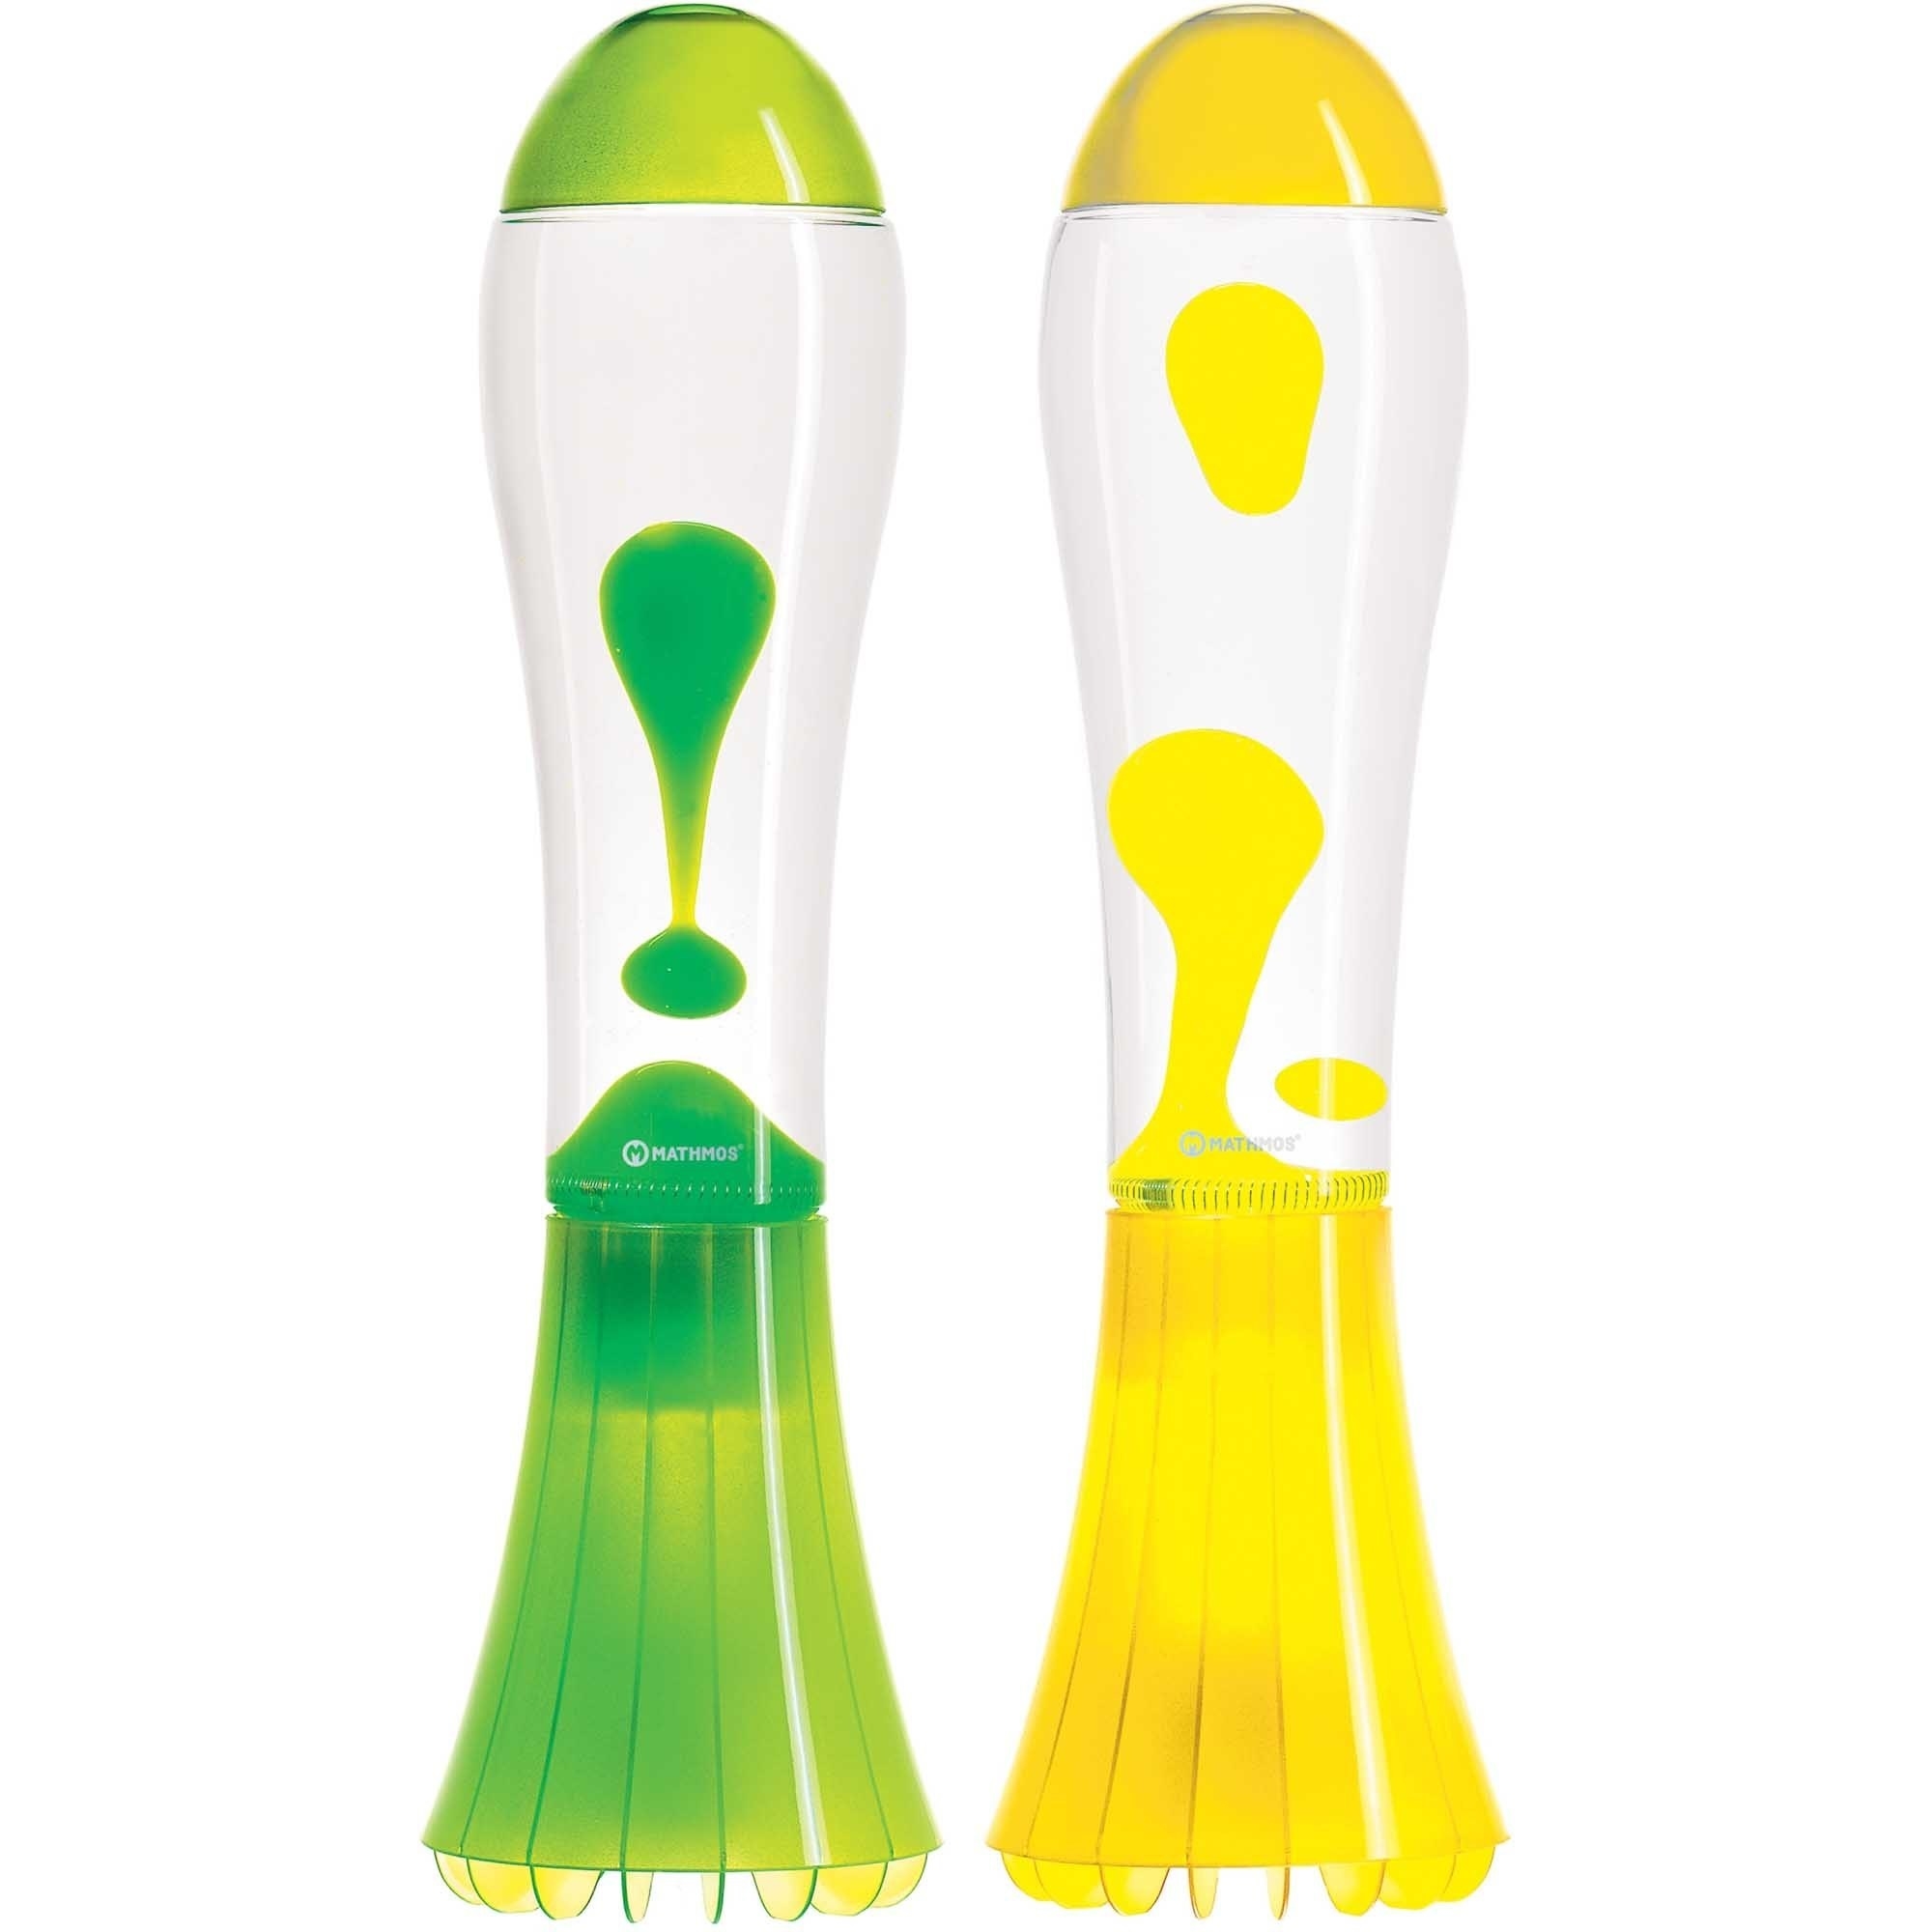 Two lava lamps that look like rockets